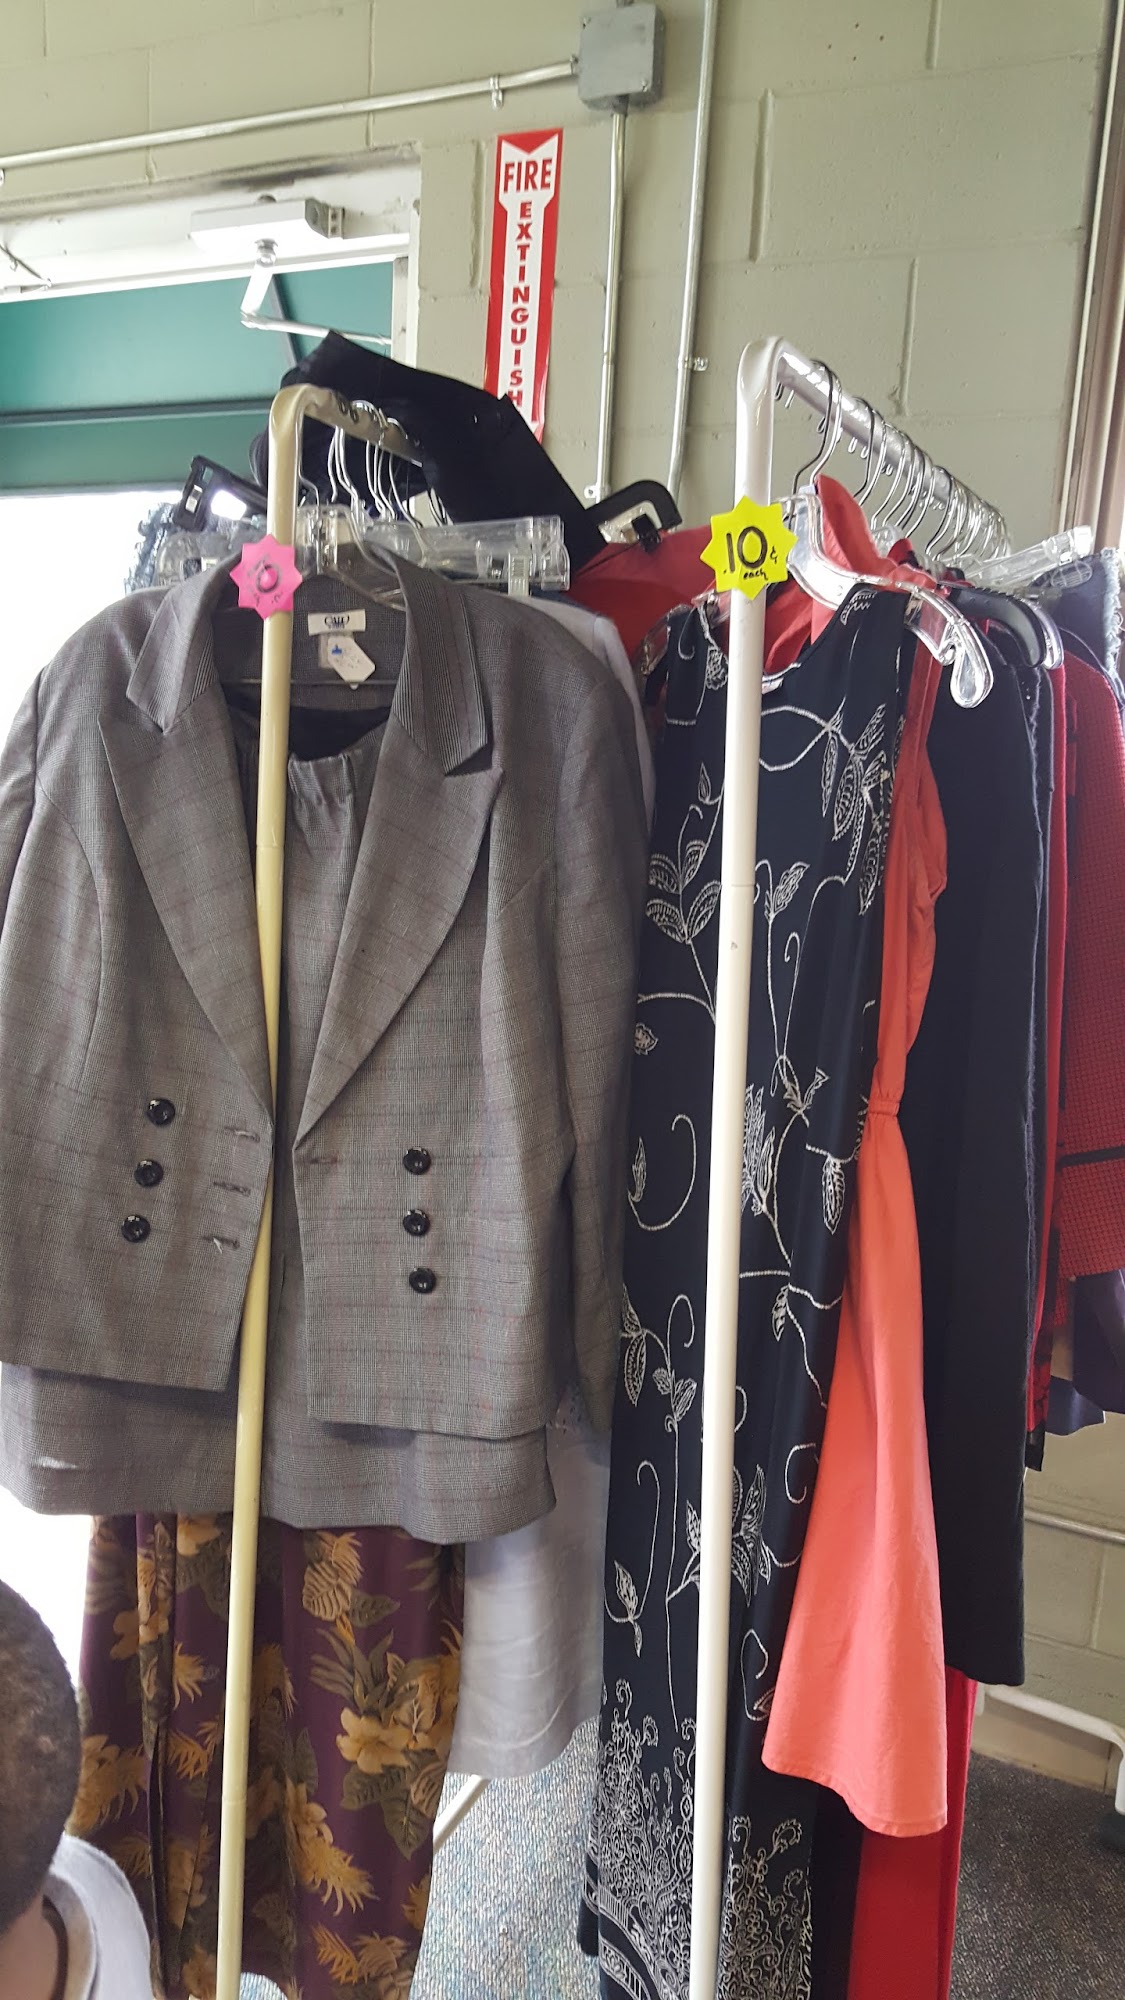 The Salvation Army Thrift Store - Milledgeville